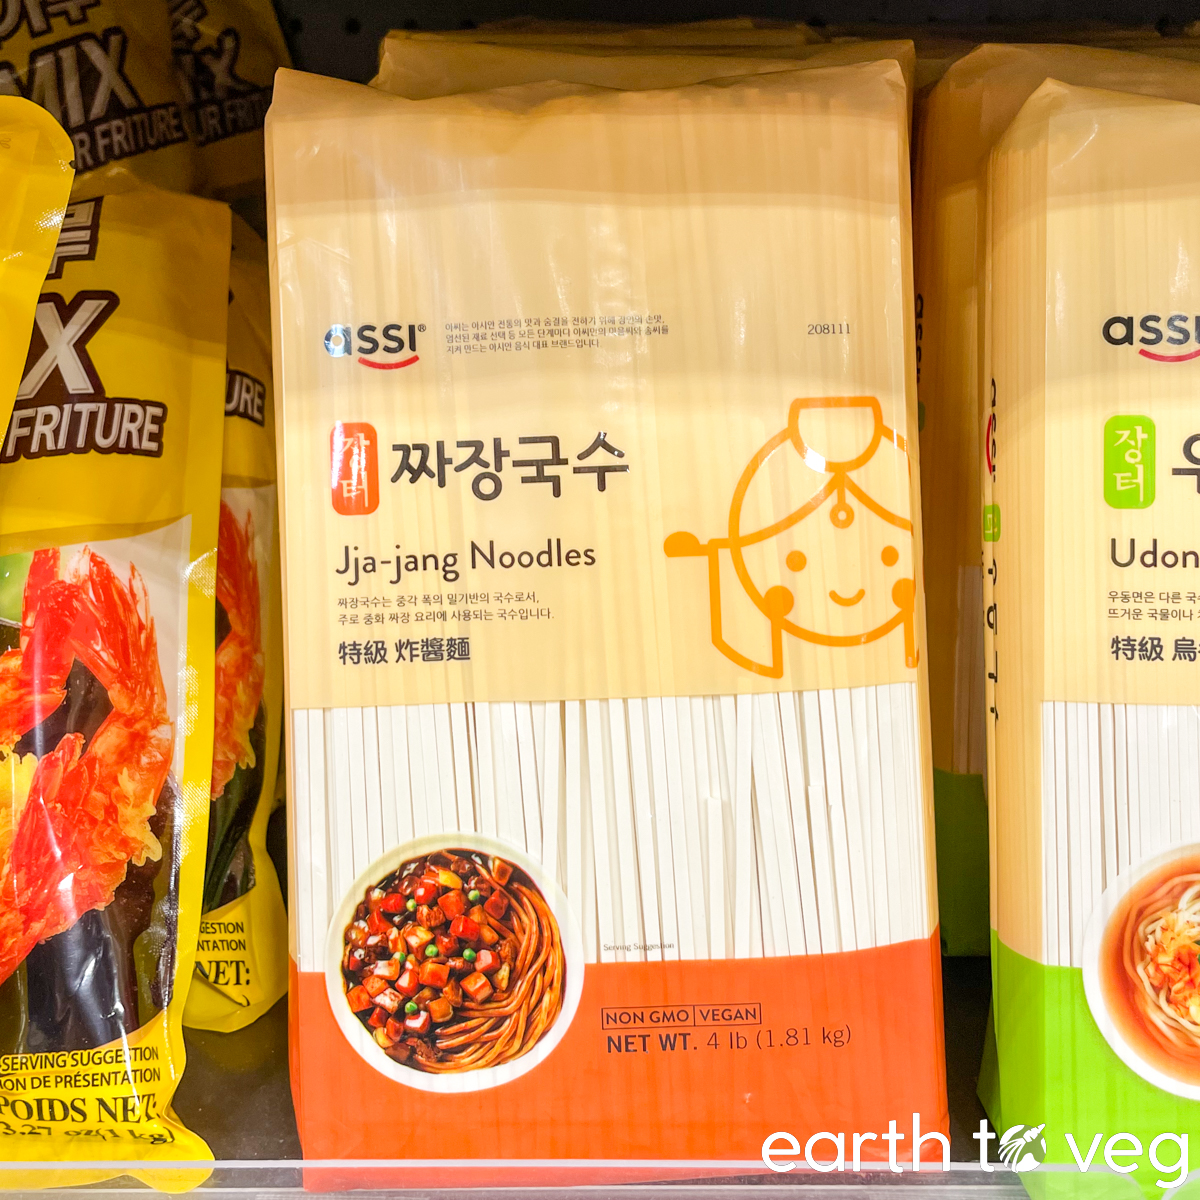 A row of packaged dry jajang noodles found at A-Mart.